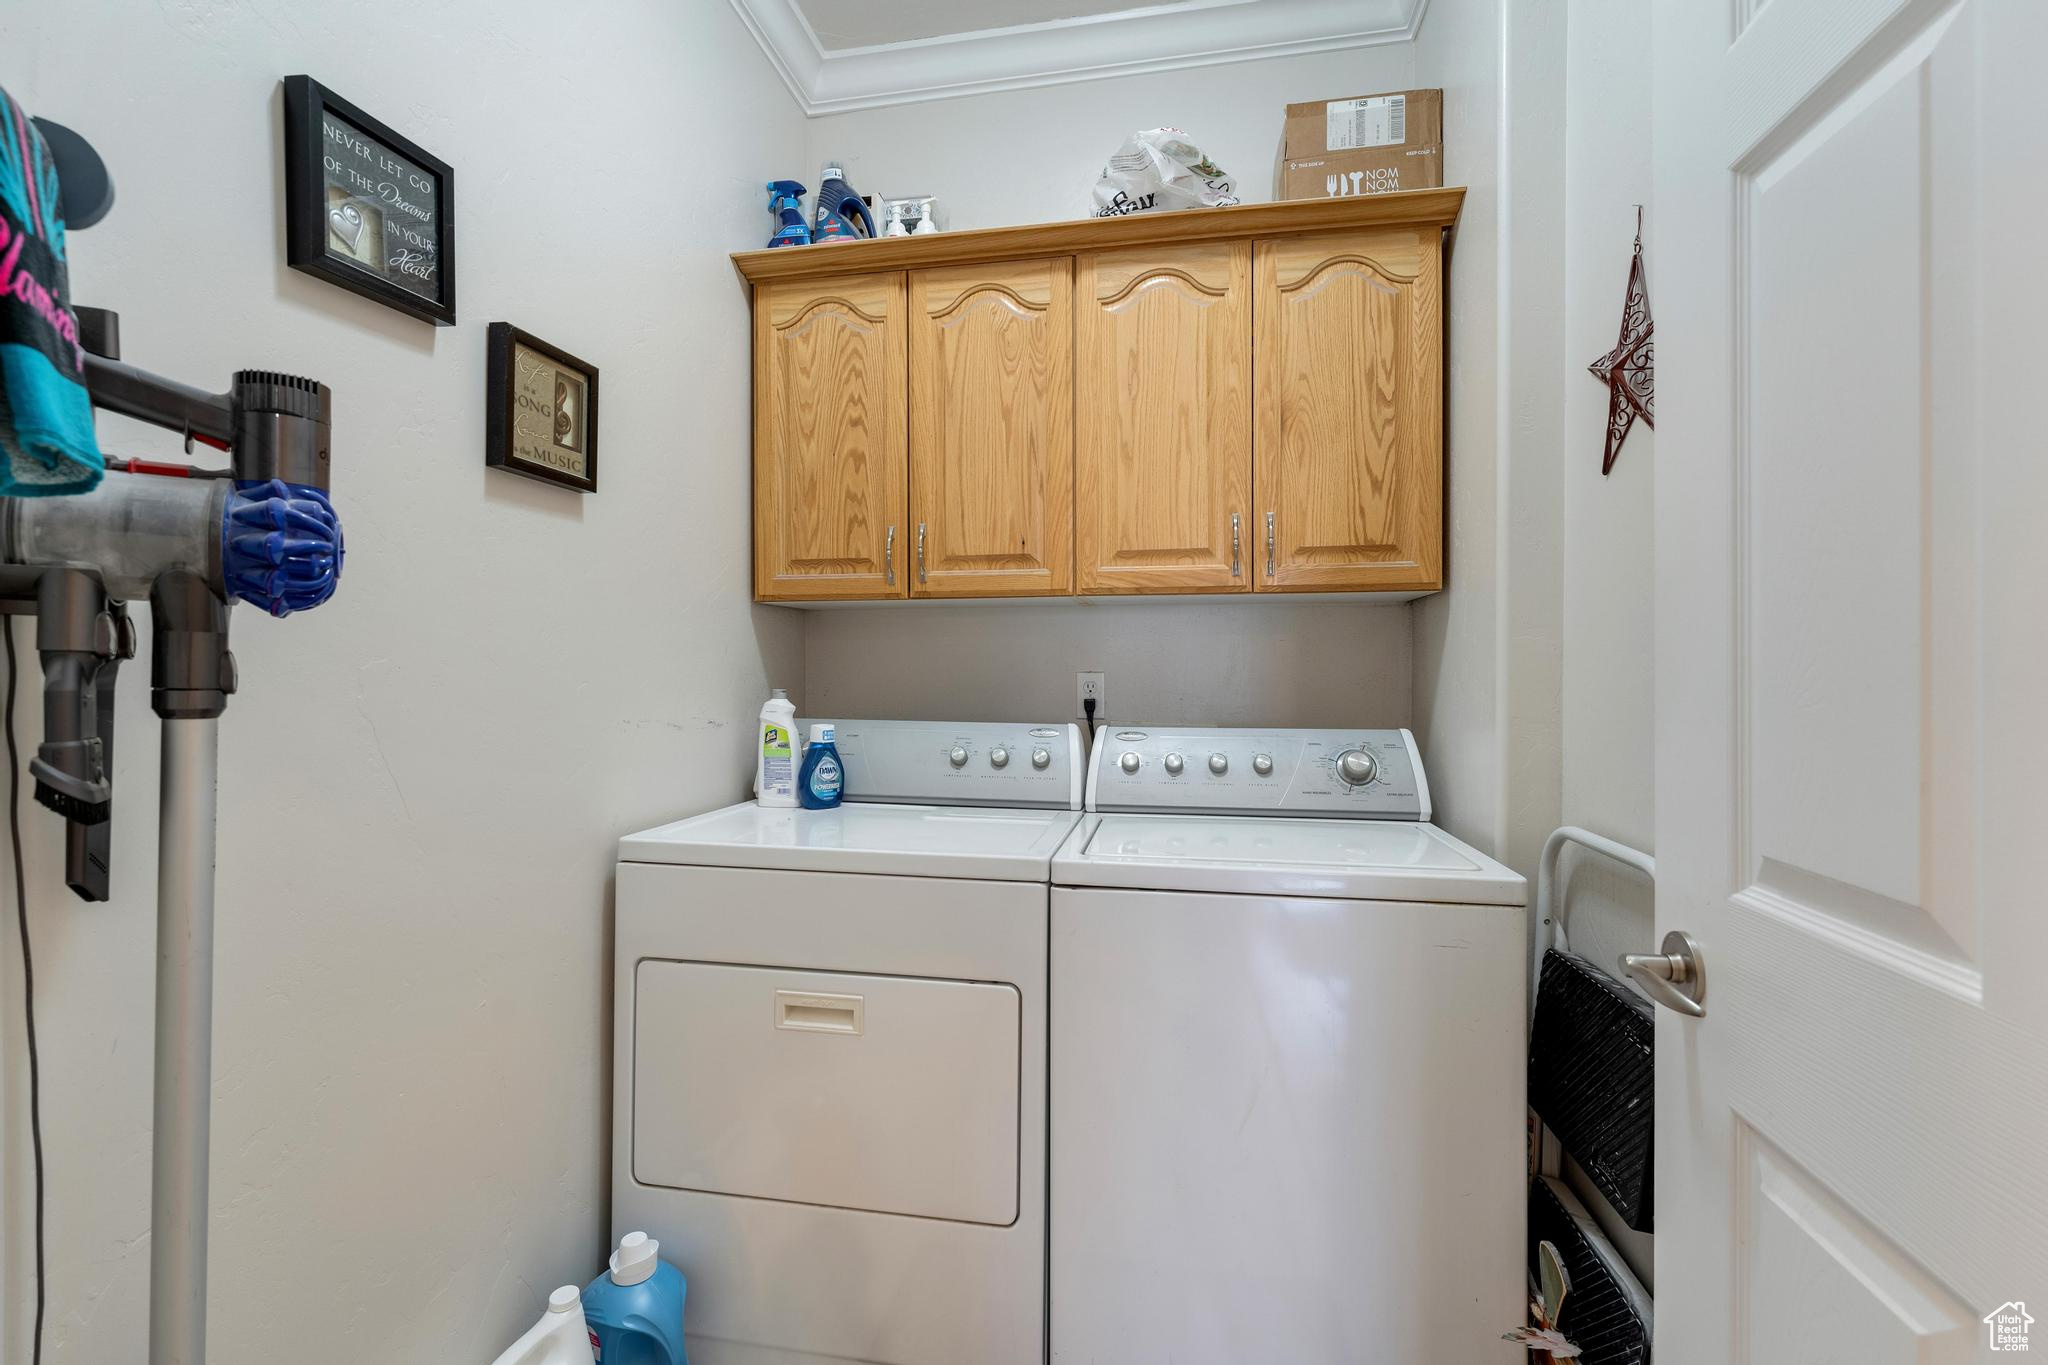 Laundry Room of Mother-In-Law Apartment